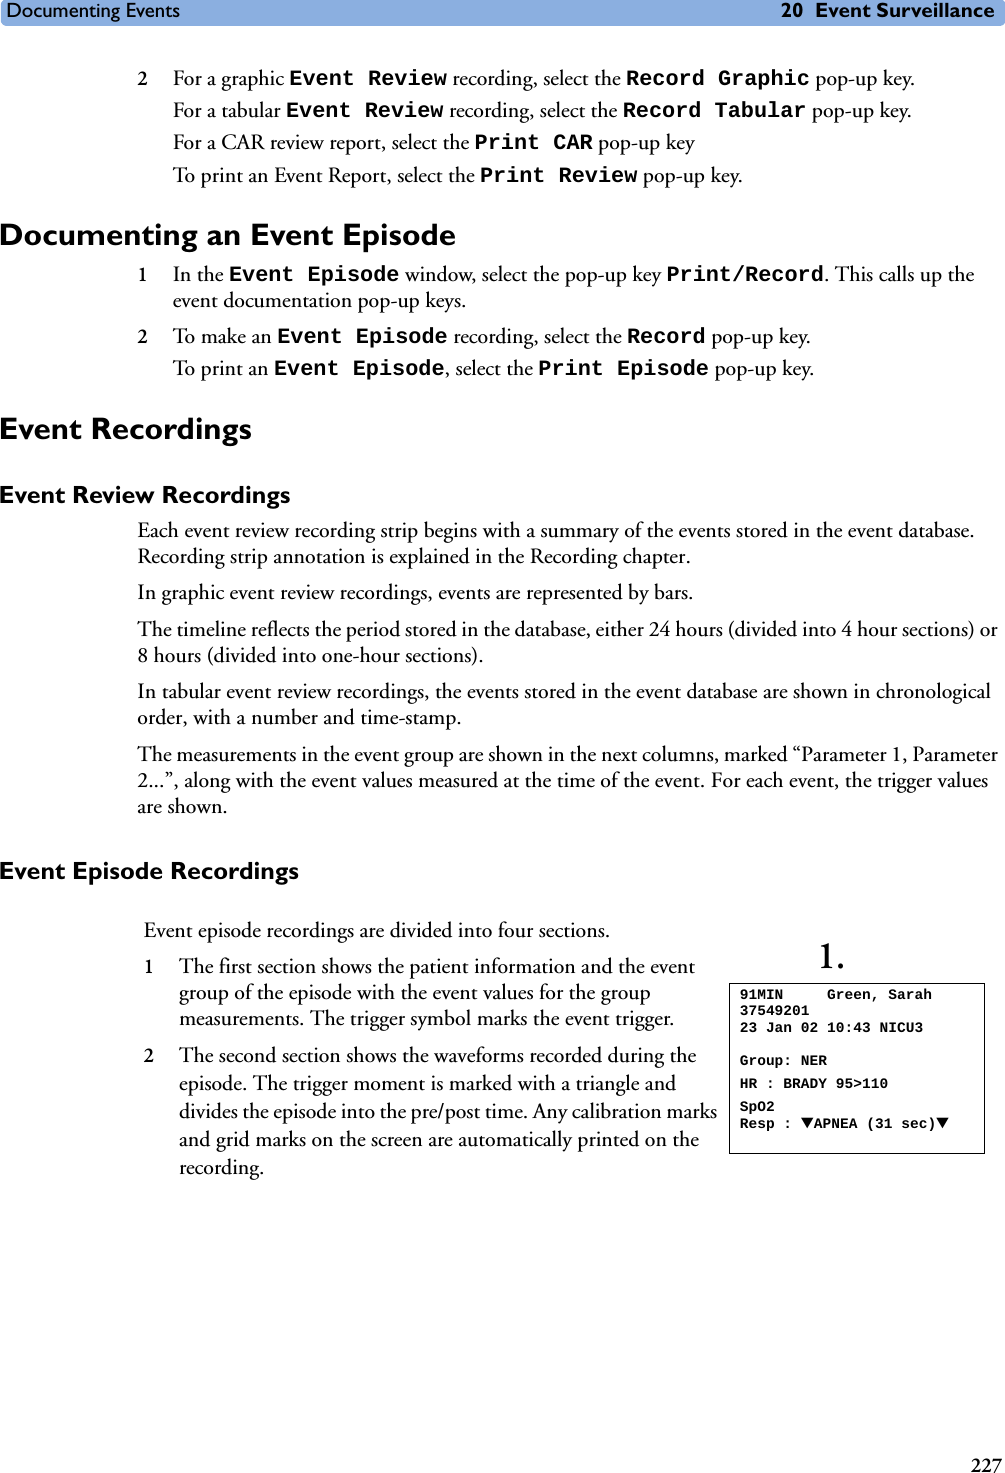 Documenting Events 20 Event Surveillance2272For a graphic Event Review recording, select the Record Graphic pop-up key.For a tabular Event Review recording, select the Record Tabular pop-up key.For a CAR review report, select the Print CAR pop-up keyTo print an Event Report, select the Print Review pop-up key.Documenting an Event Episode1In the Event Episode window, select the pop-up key Print/Record. This calls up the event documentation pop-up keys.2To mak e a n  Event Episode recording, select the Record pop-up key.To pri n t an Event Episode, select the Print Episode pop-up key.Event RecordingsEvent Review RecordingsEach event review recording strip begins with a summary of the events stored in the event database. Recording strip annotation is explained in the Recording chapter.In graphic event review recordings, events are represented by bars. The timeline reflects the period stored in the database, either 24 hours (divided into 4 hour sections) or 8 hours (divided into one-hour sections). In tabular event review recordings, the events stored in the event database are shown in chronological order, with a number and time-stamp. The measurements in the event group are shown in the next columns, marked “Parameter 1, Parameter 2...”, along with the event values measured at the time of the event. For each event, the trigger values are shown.Event Episode RecordingsEvent episode recordings are divided into four sections. 1The first section shows the patient information and the event group of the episode with the event values for the group measurements. The trigger symbol marks the event trigger.2The second section shows the waveforms recorded during the episode. The trigger moment is marked with a triangle and divides the episode into the pre/post time. Any calibration marks and grid marks on the screen are automatically printed on the recording. 91MIN     Green, Sarah  3754920123 Jan 02 10:43 NICU3Group: NERHR : BRADY 95&gt;110SpO2 Resp : ▼APNEA (31 sec)▼1.